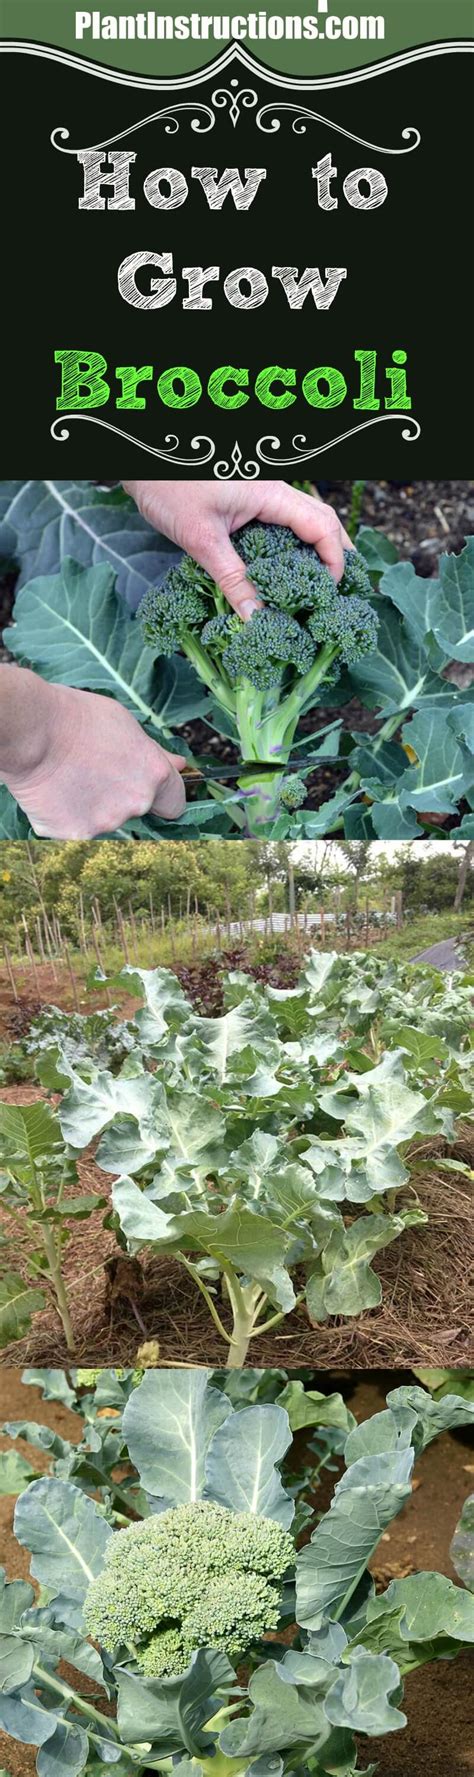 How To Grow Broccoli From Seeds Plant Instructions